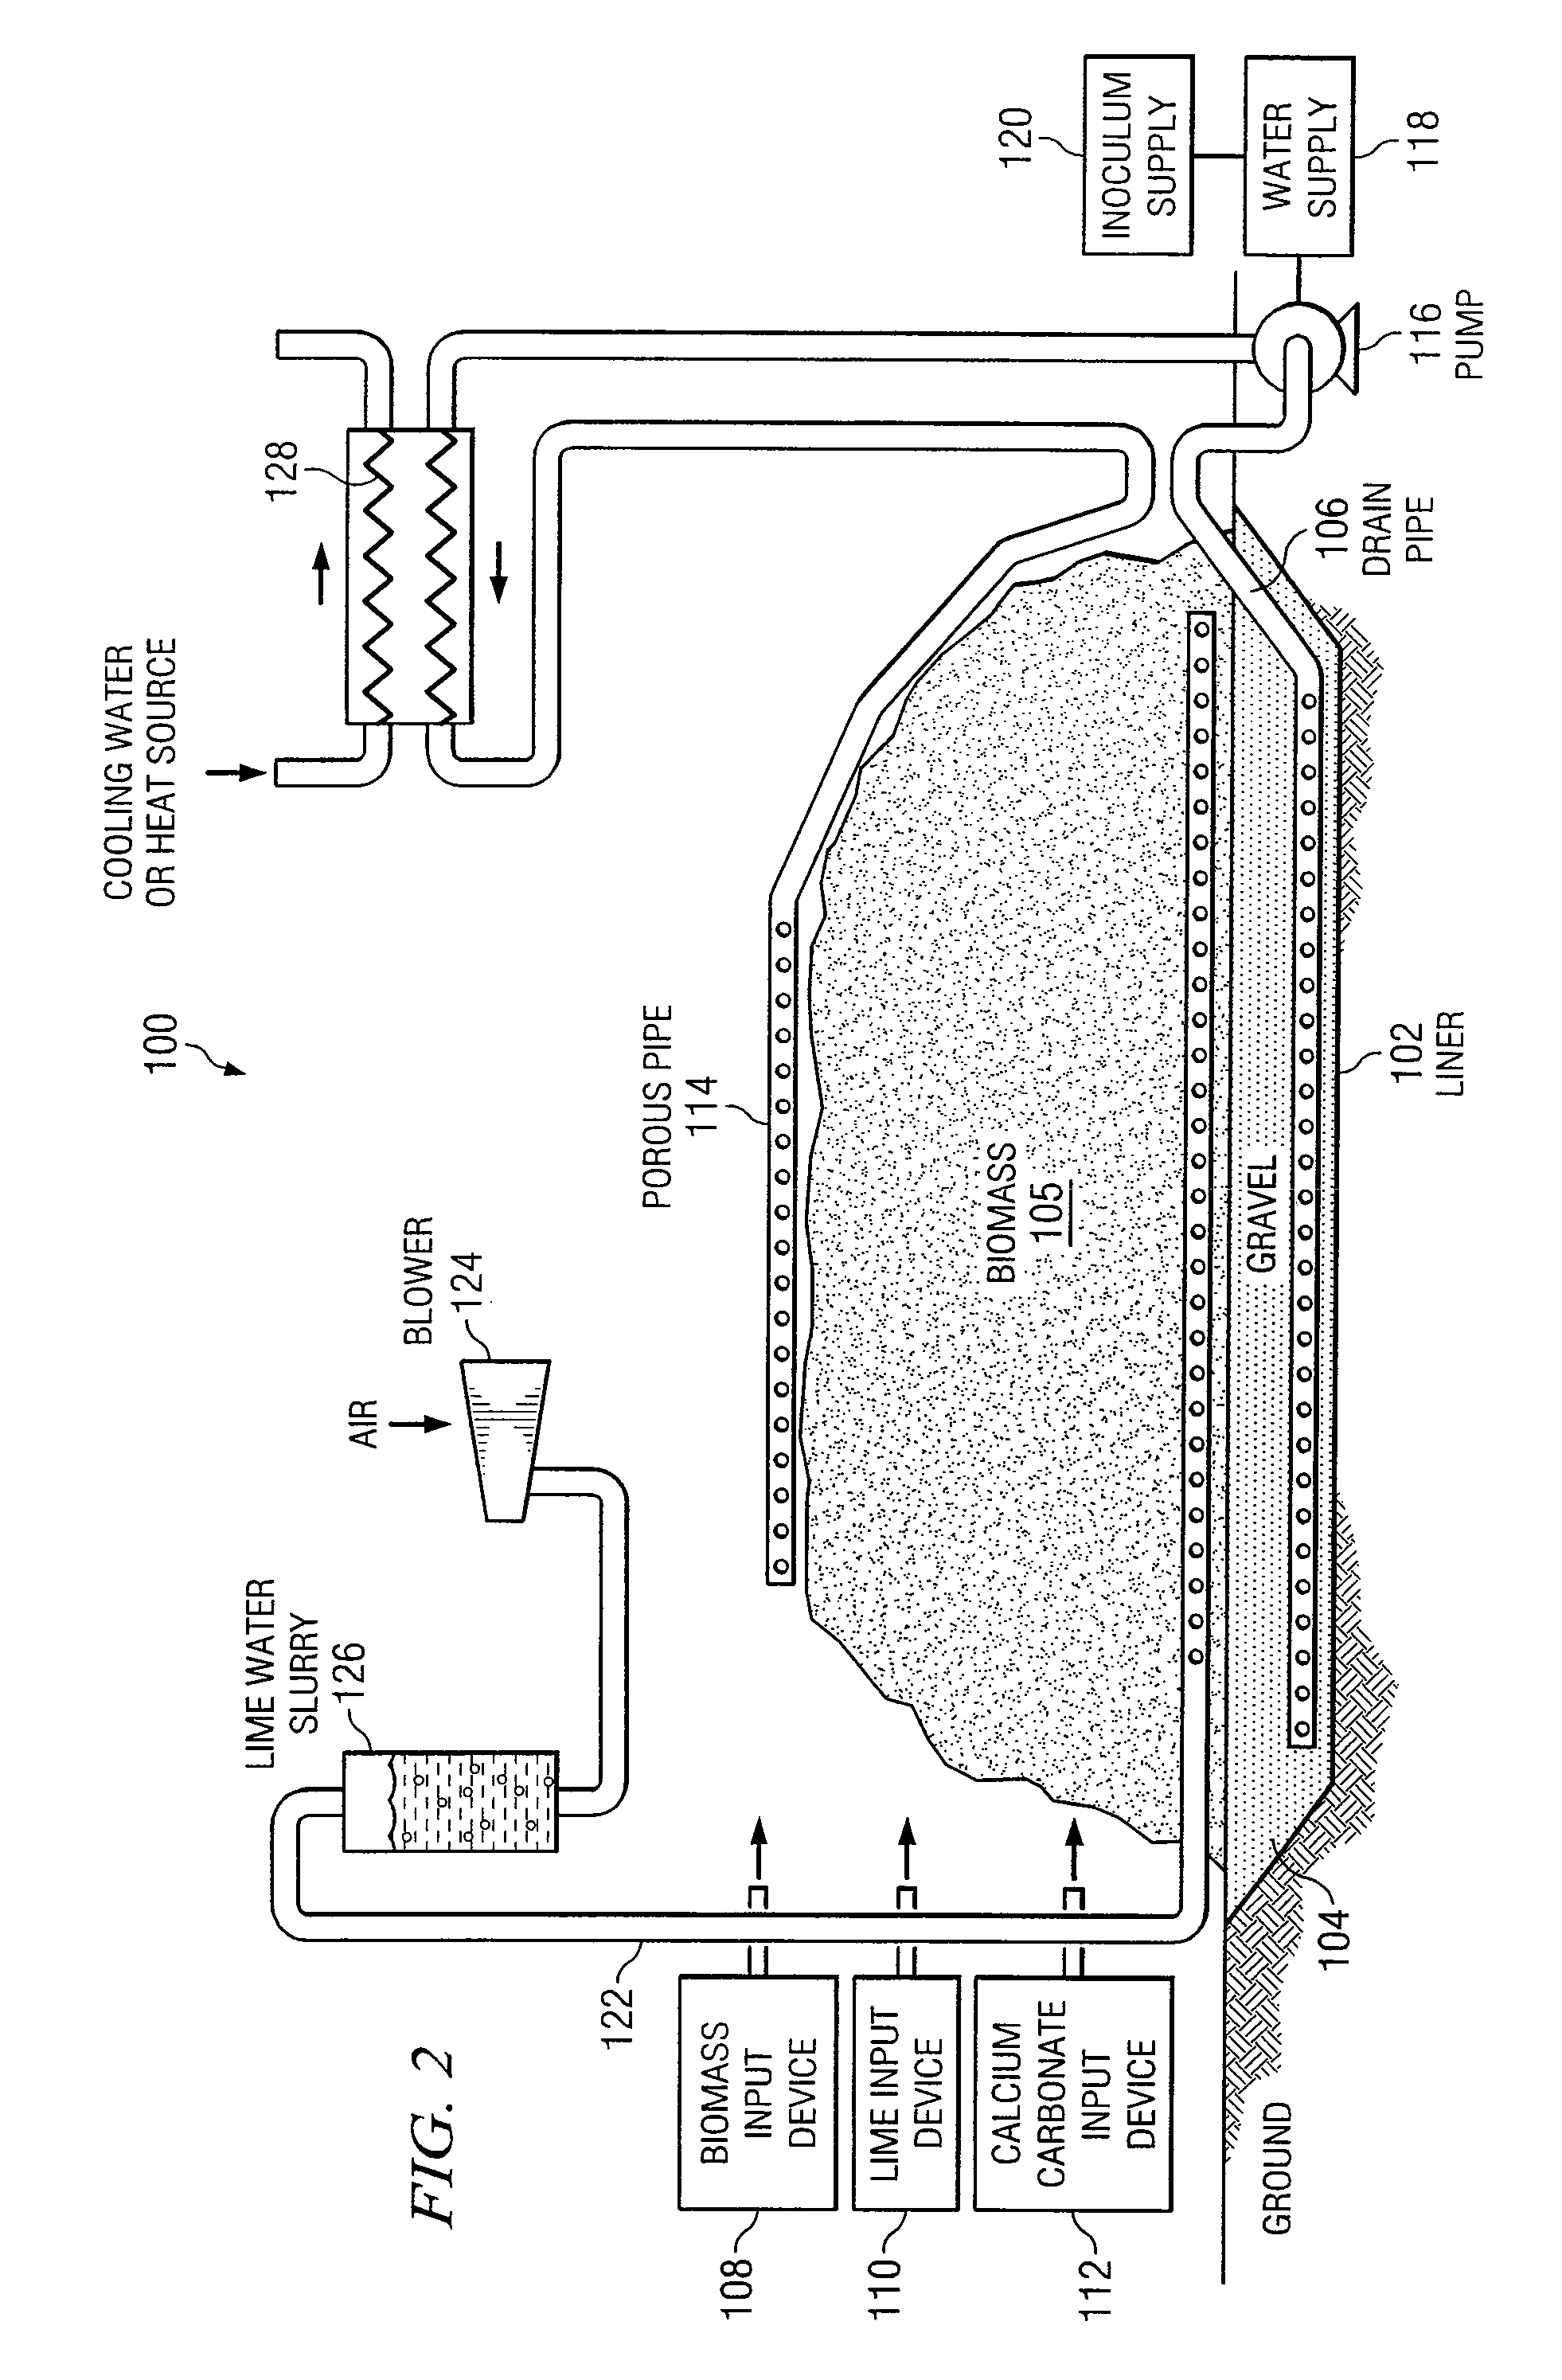 Methods and Systems for Pretreatment and Processing of Biomass